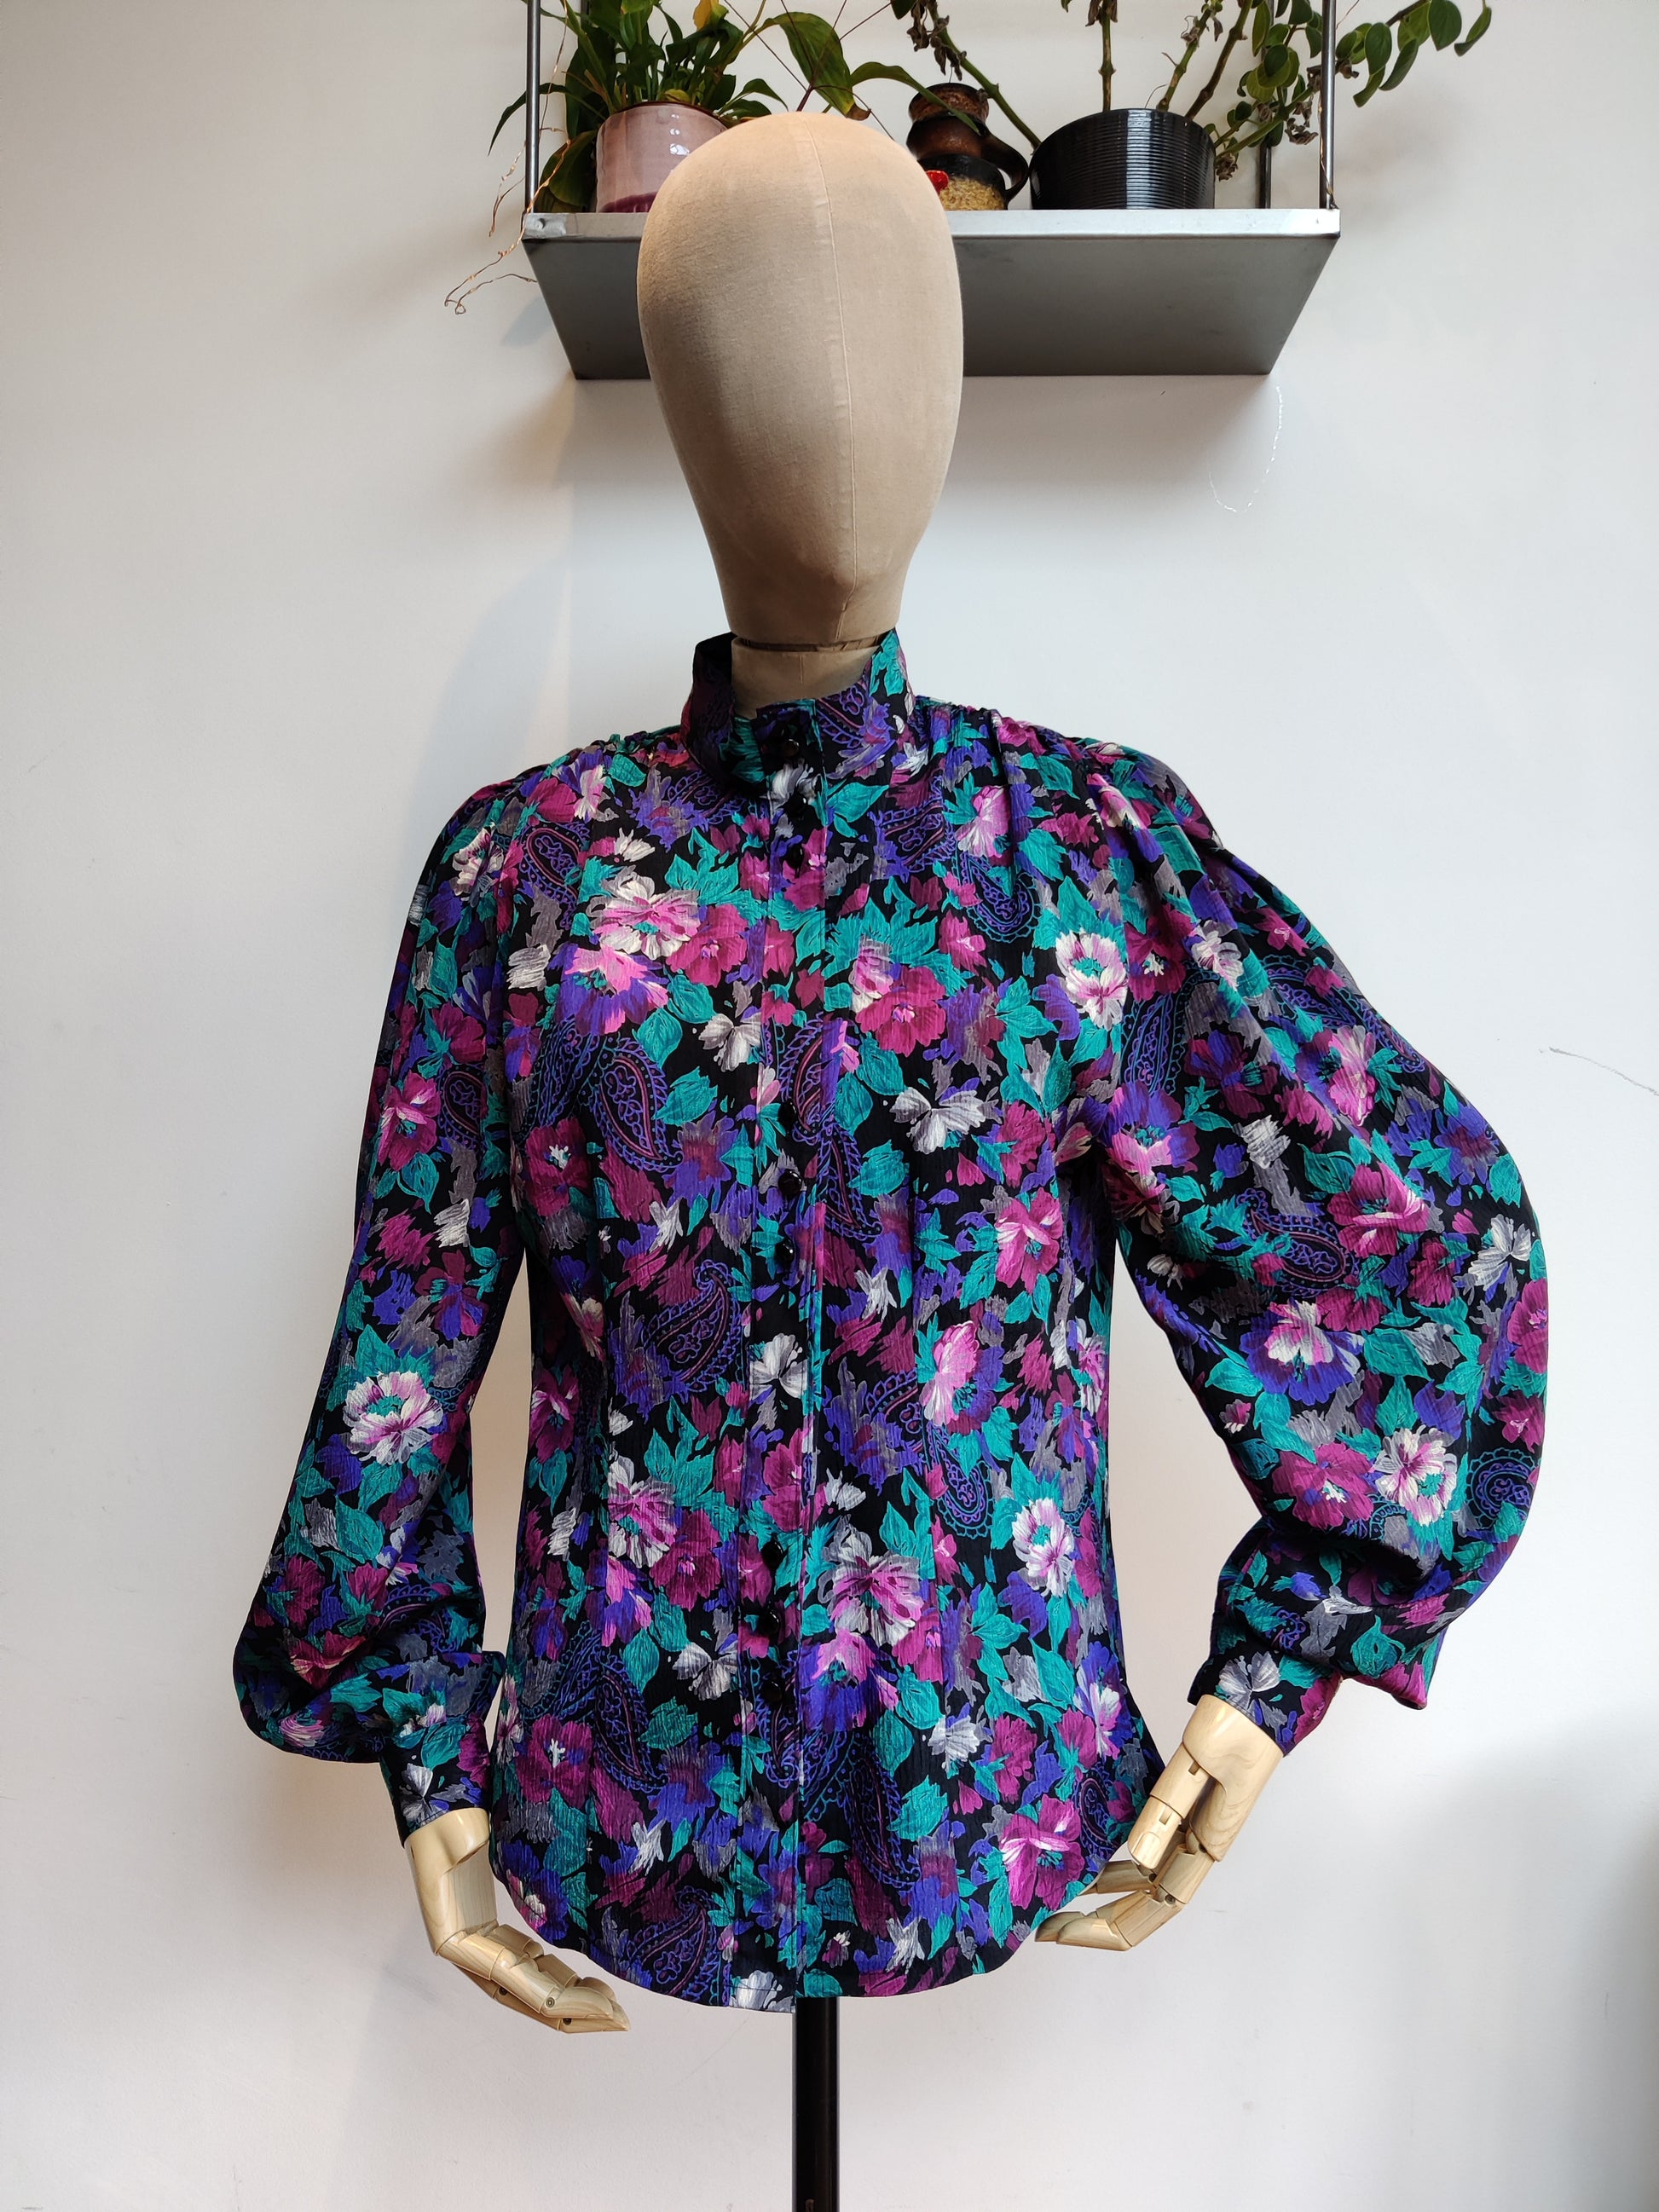 Vintage floral print blouse with balloon sleeves